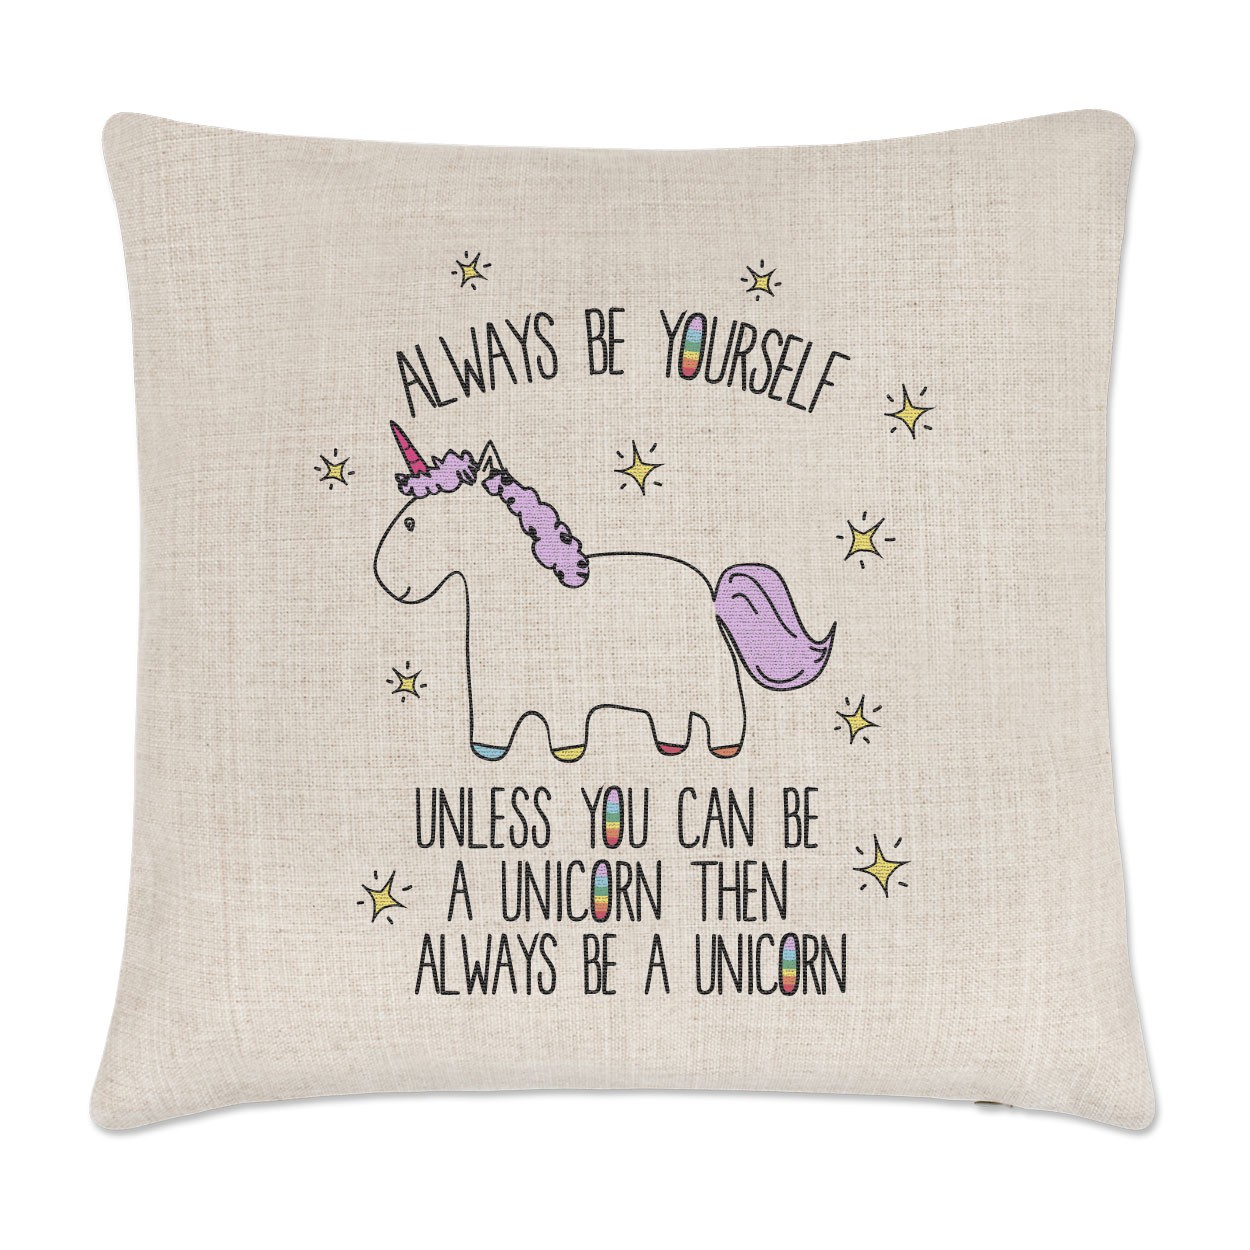 Lila Unicorn Always Be Yourself Linen Cushion Cover